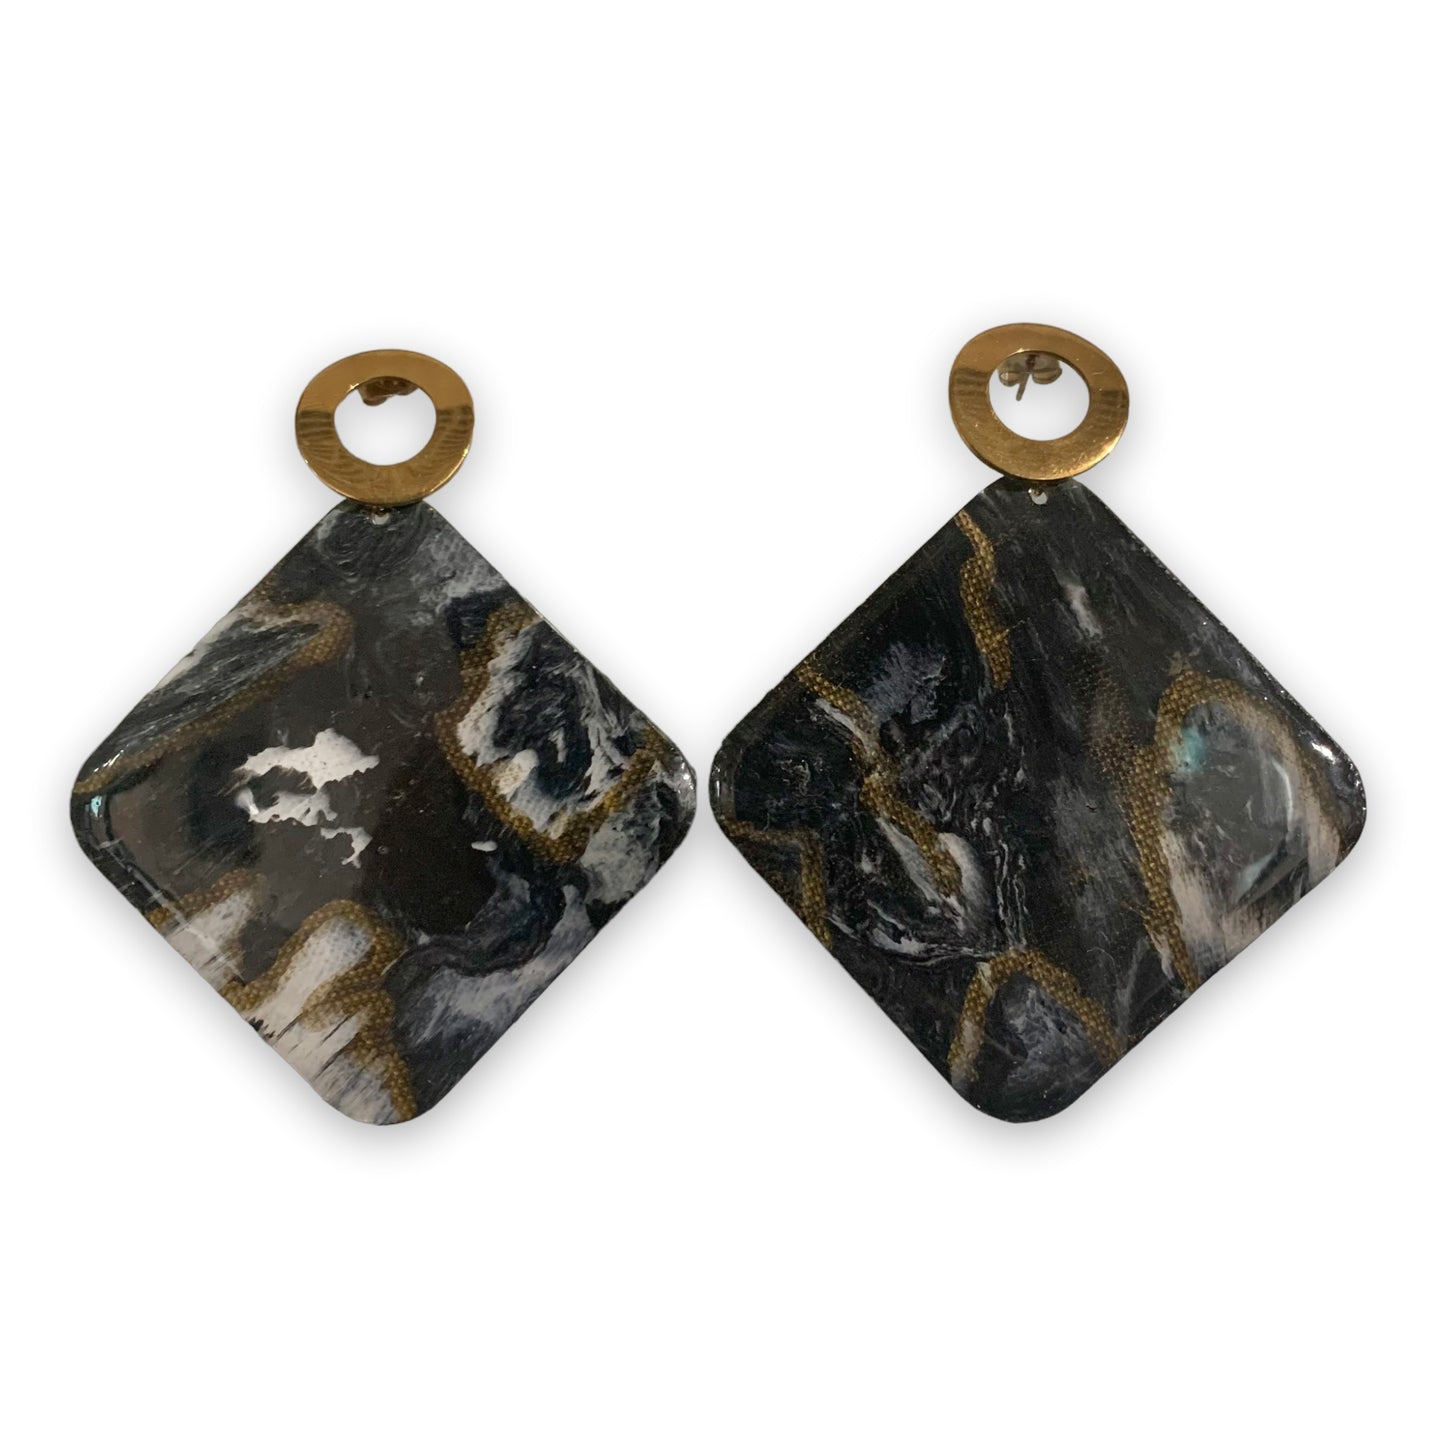 Recycled bottle tops Precious Plastic Statement Studs Square Black Gold Artesian Handcrafted Ethically made